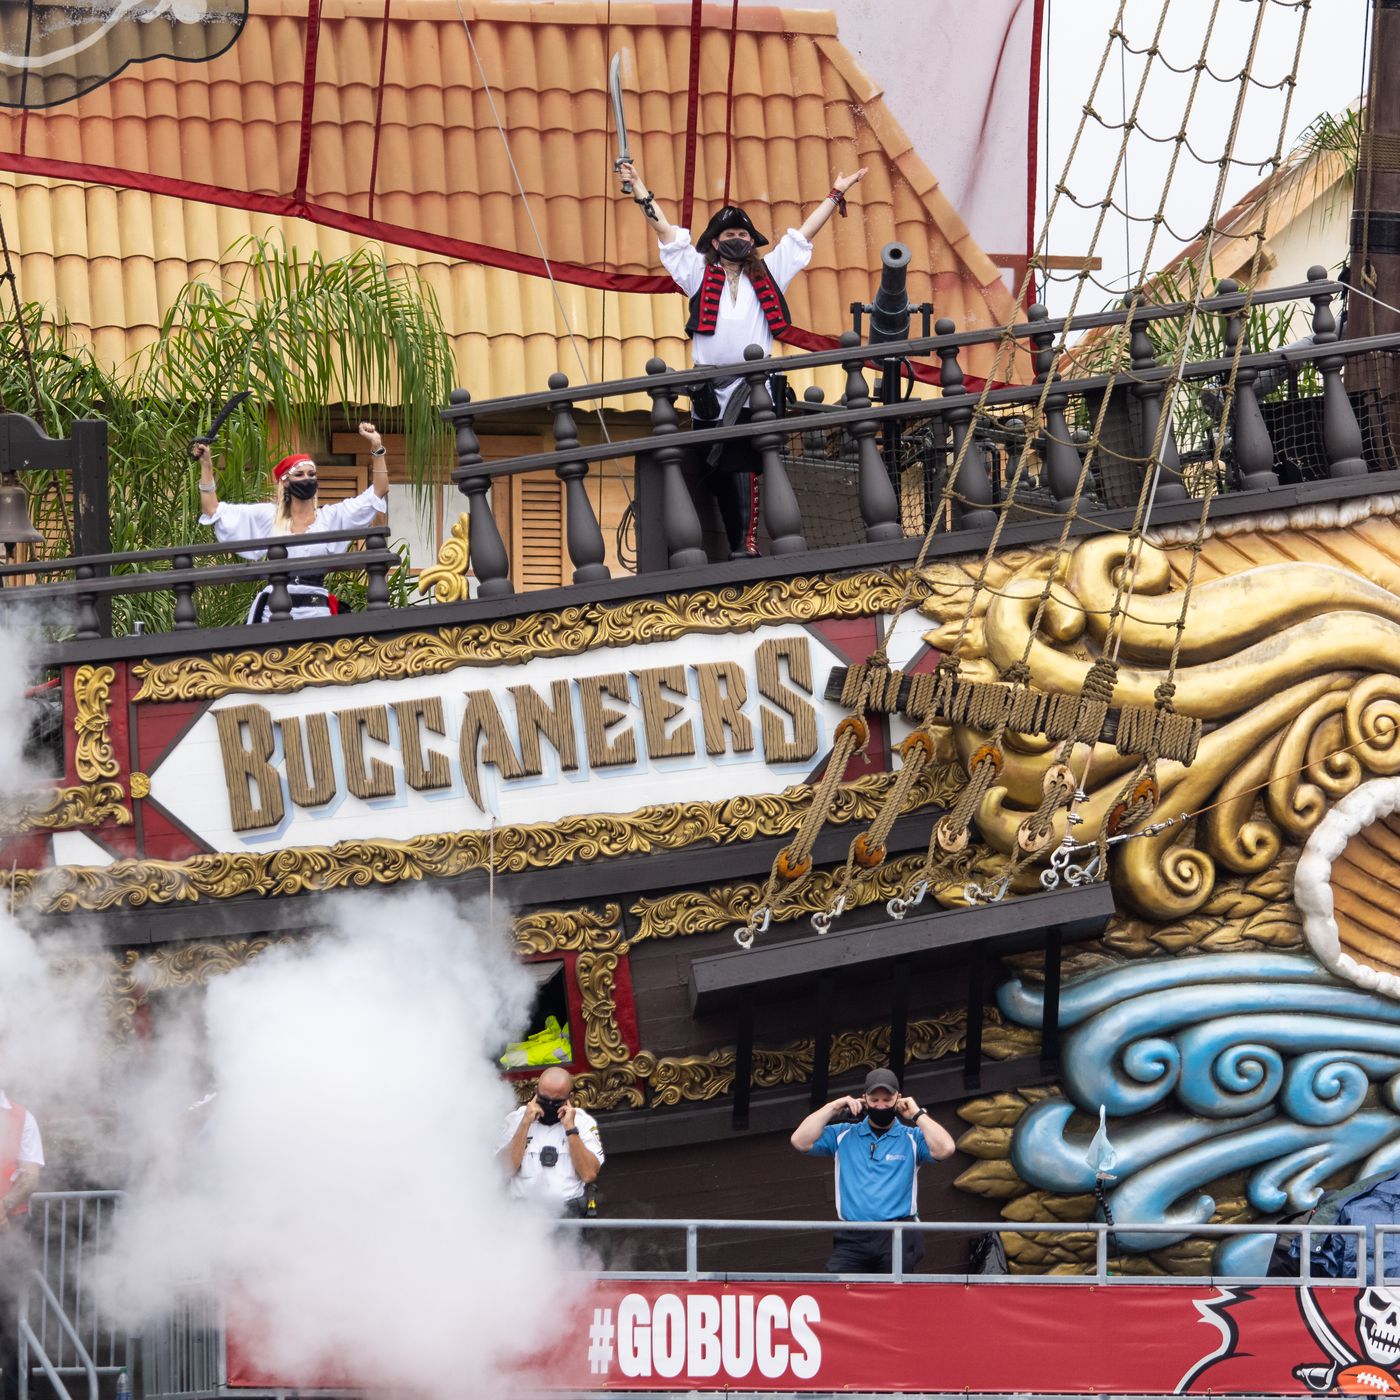 Home team Buccaneers, without the home team perks - Bucs Nation